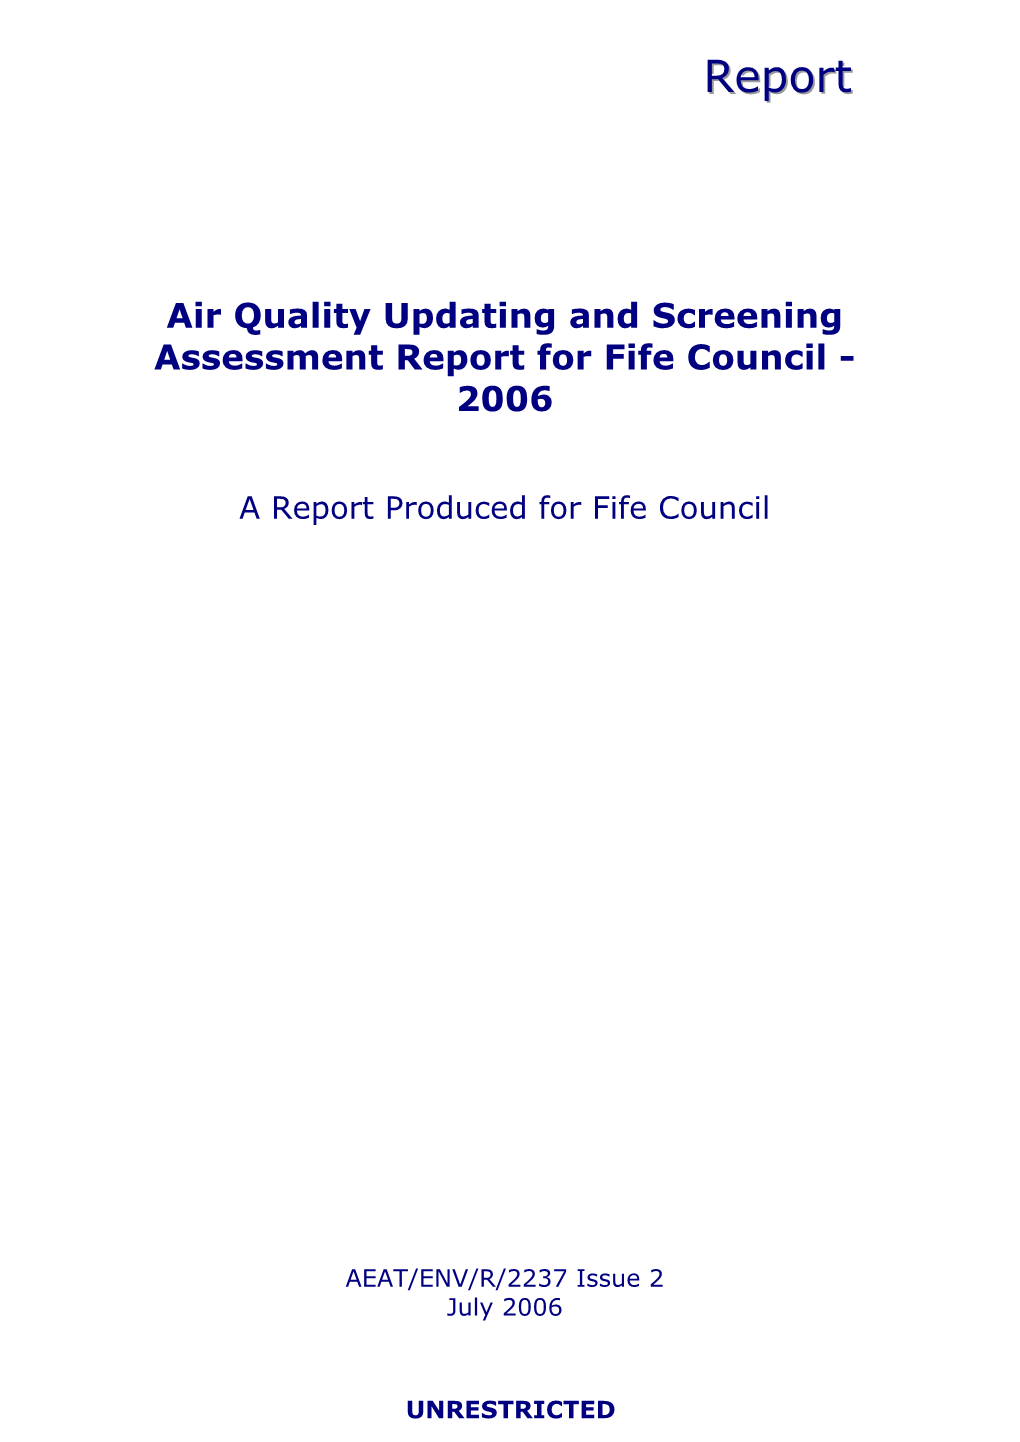 Air Quality Updating and Screening Assessment Report 2006